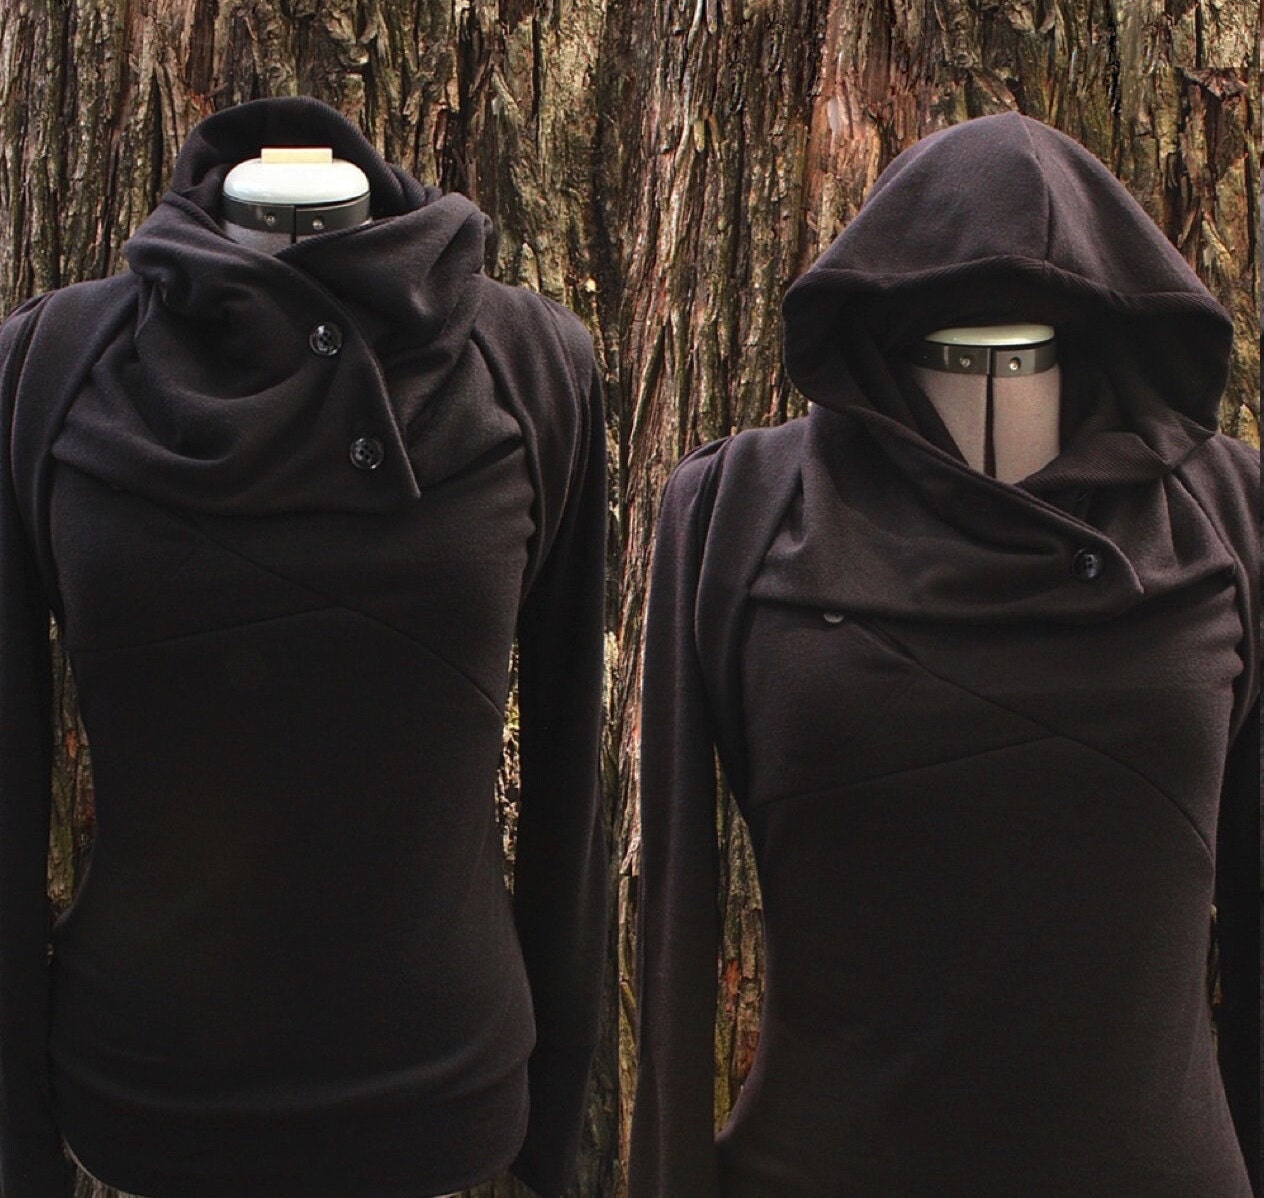 Lightweight black hooded cowl sweater with thumbhole cuffs and elbow  patches. Made to order, any size.